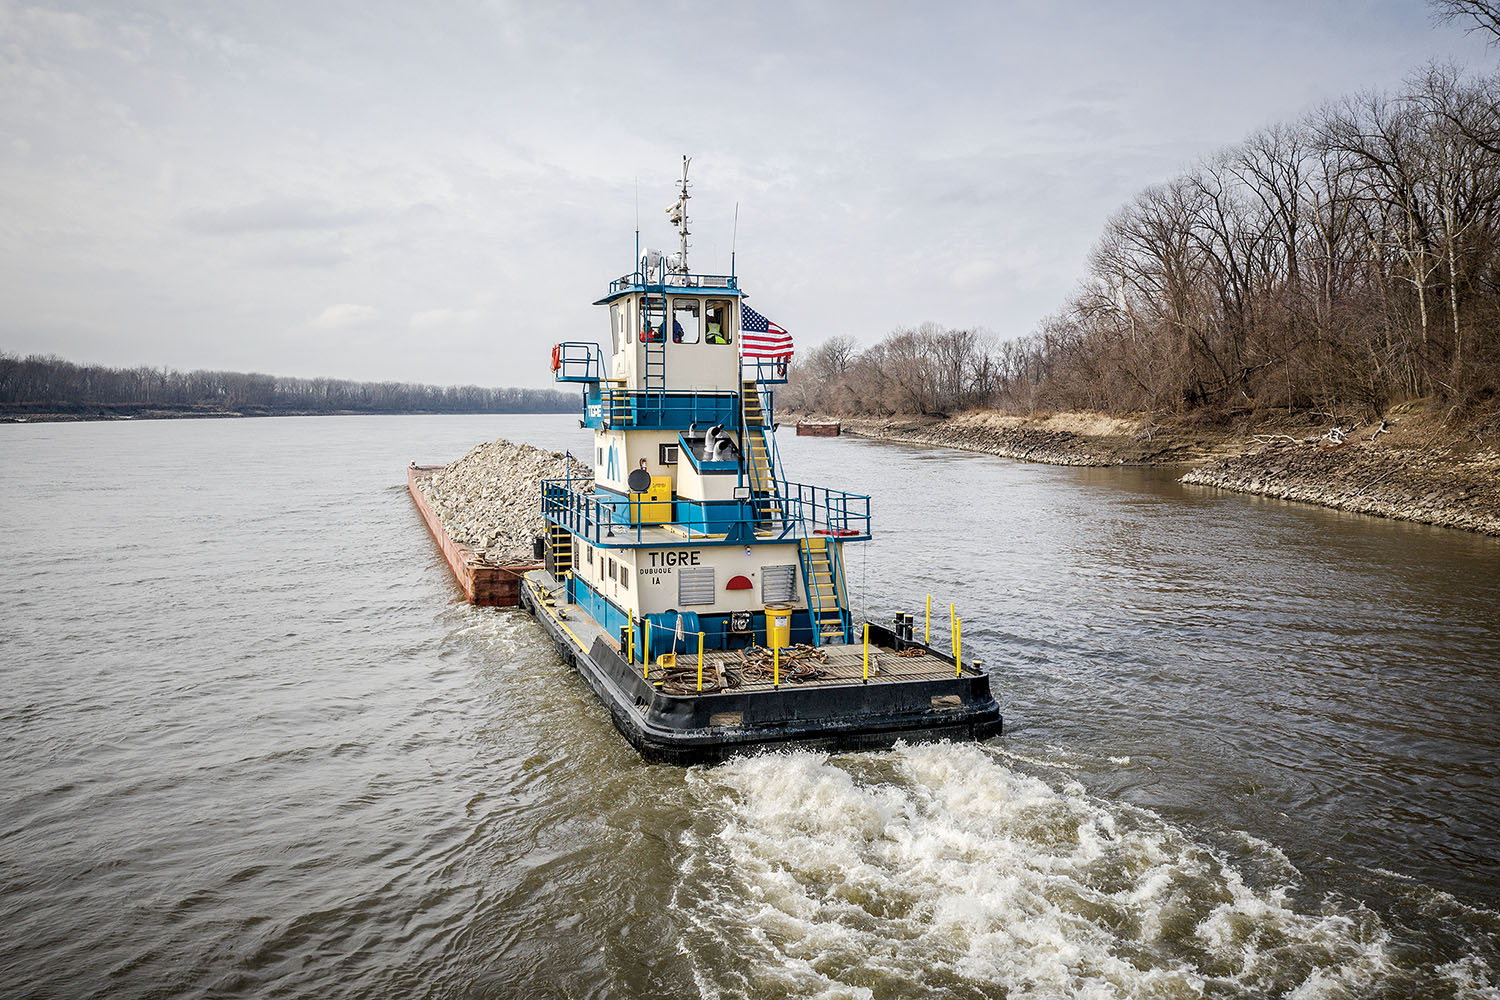 The Tigre is one of four Newt Marine Service boats repowered with Volvo engines by Interstate PowerSystems. Plans call for Interstate to repower three additional Newt Marine vessels. (Photo courtesy of Volvo Penta